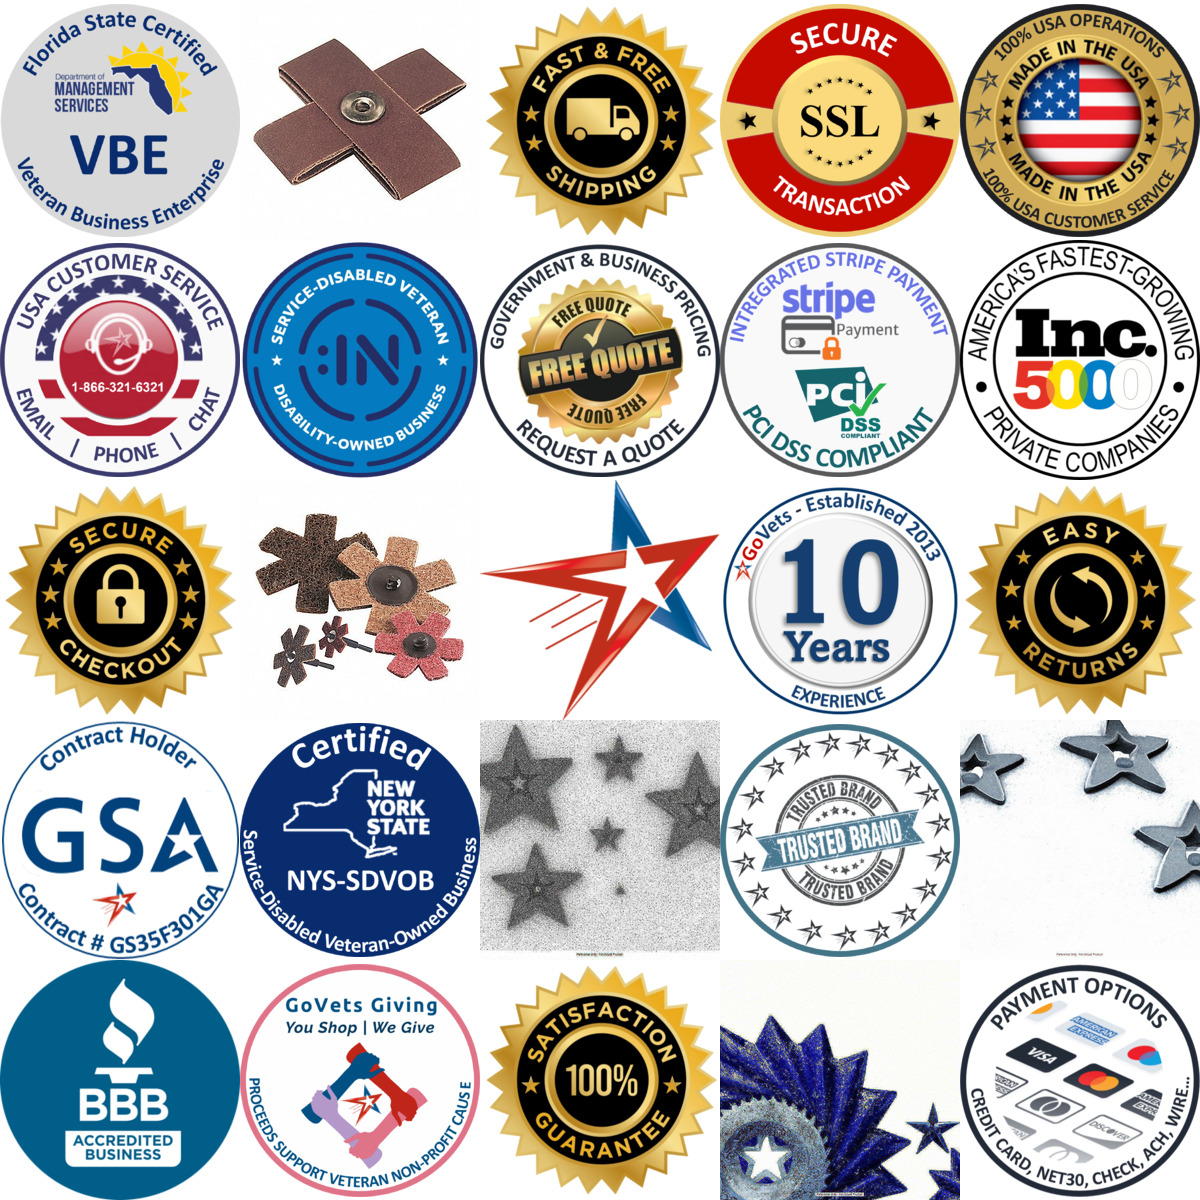 A selection of Abrasive Stars products on GoVets